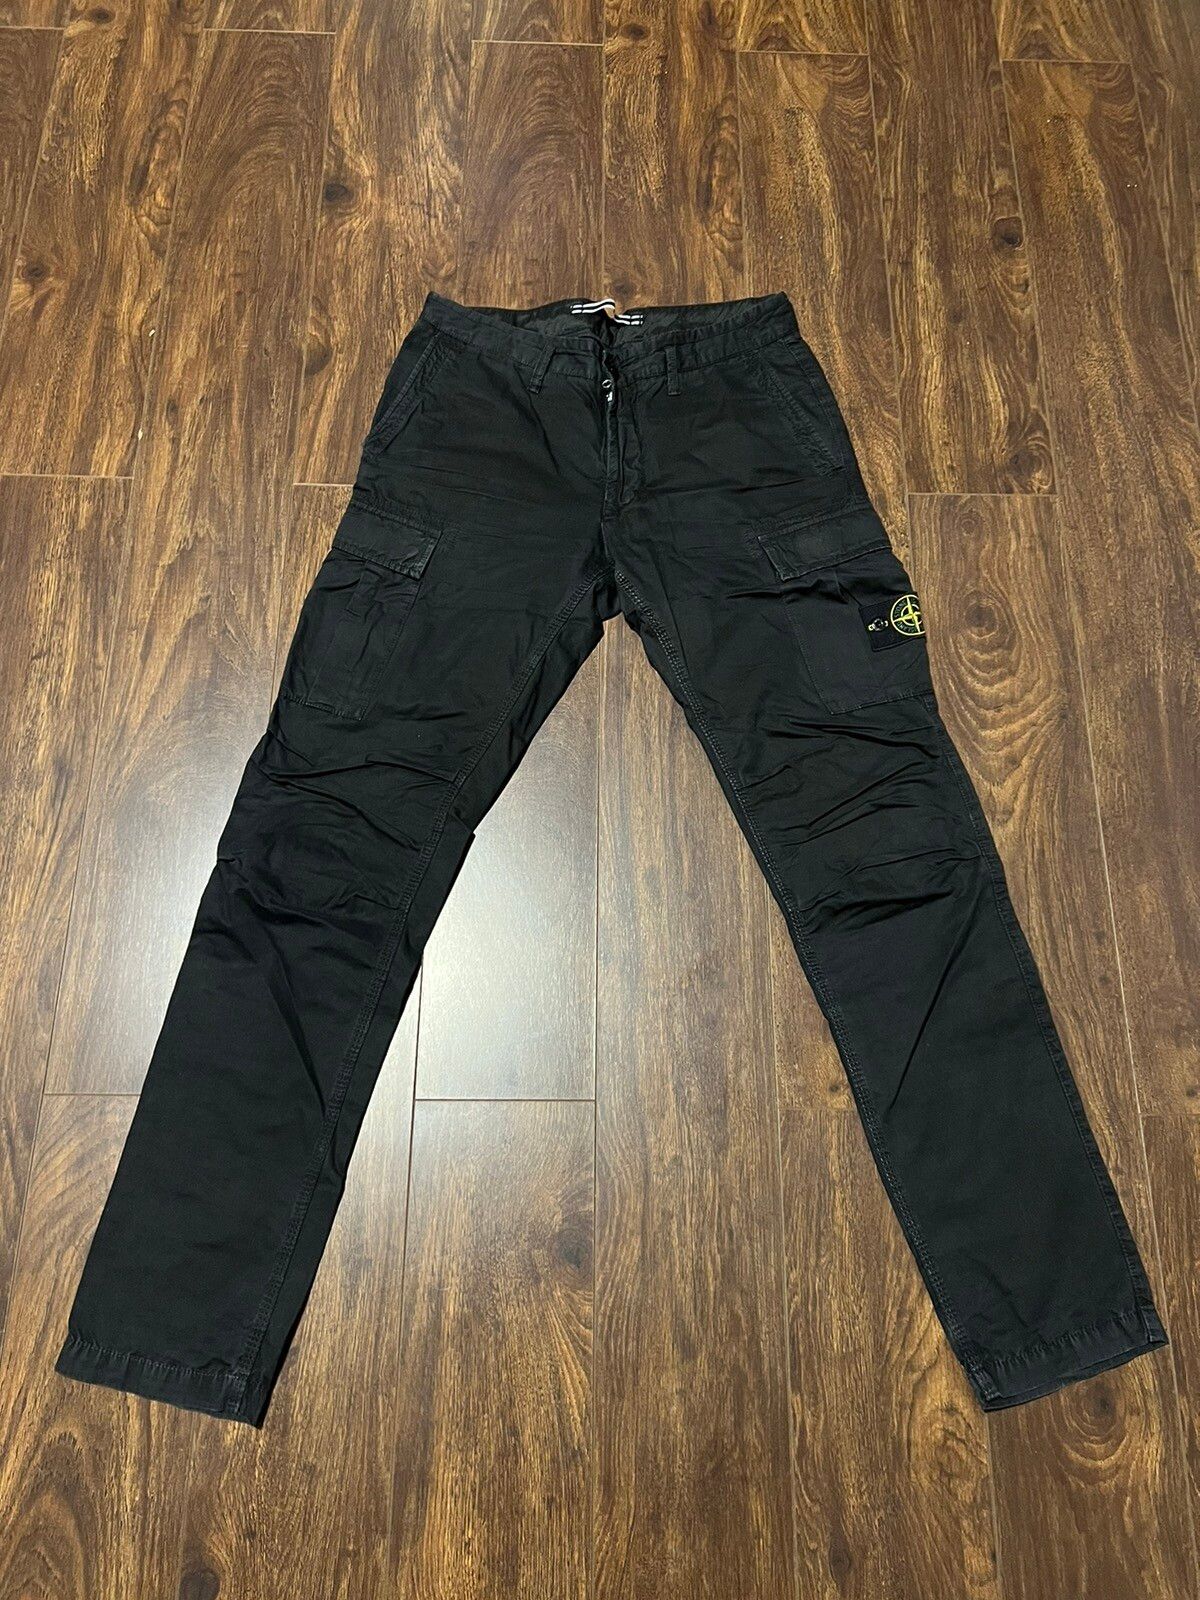 Pre-owned Stone Island Cargo Pants Black Size 33